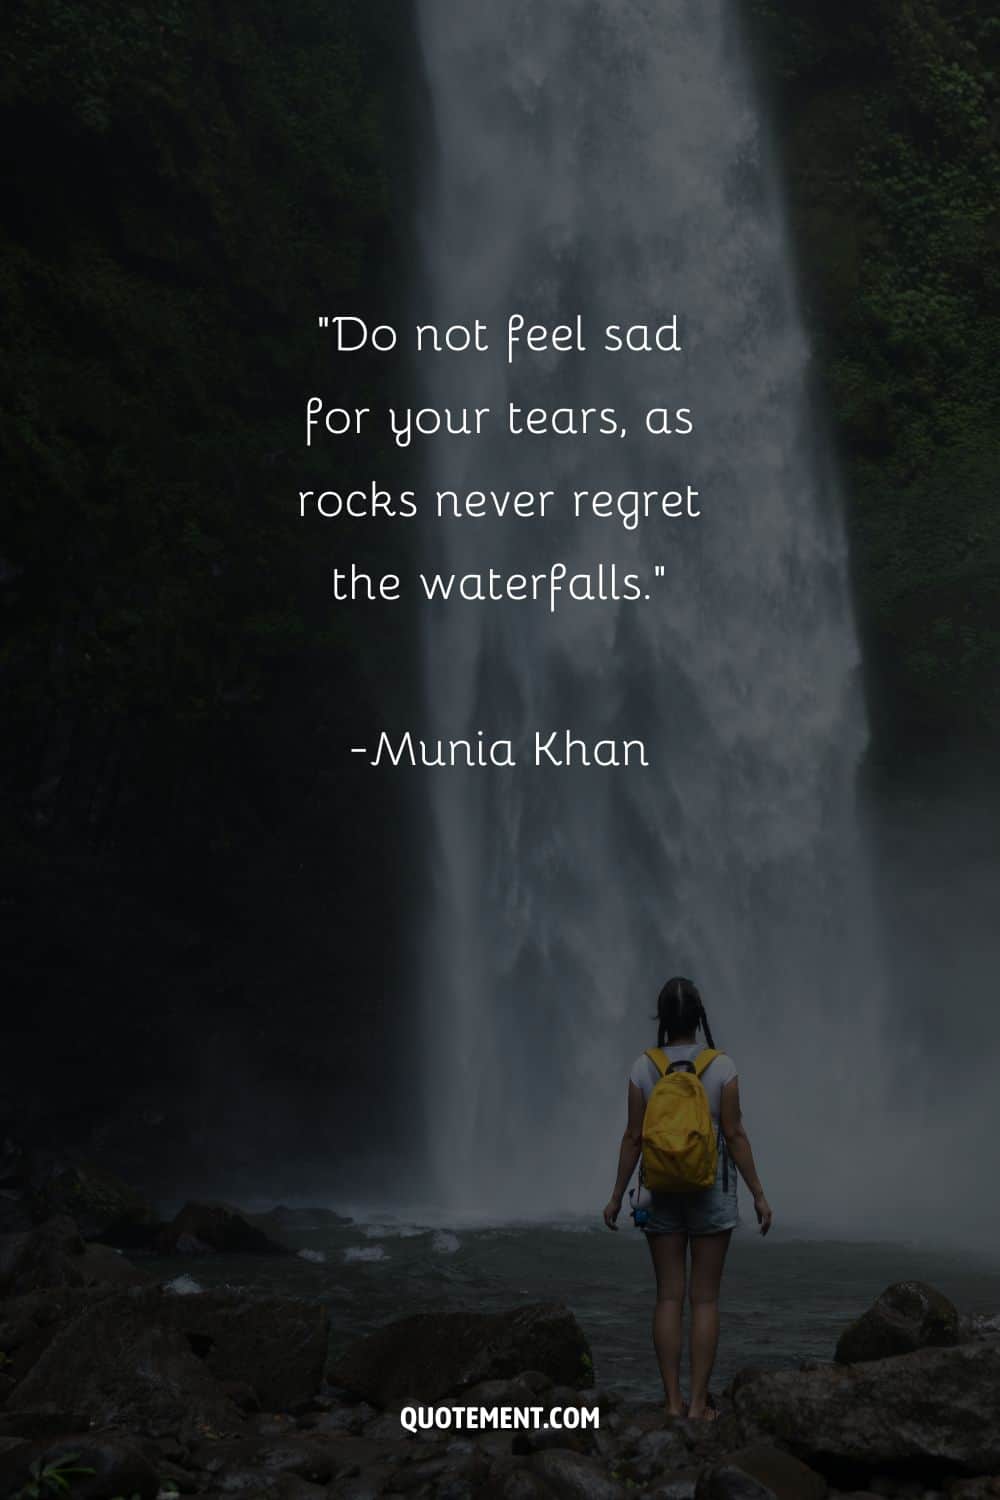 Amazing quote by Munia Khan and a woman by the waterfall in the background
